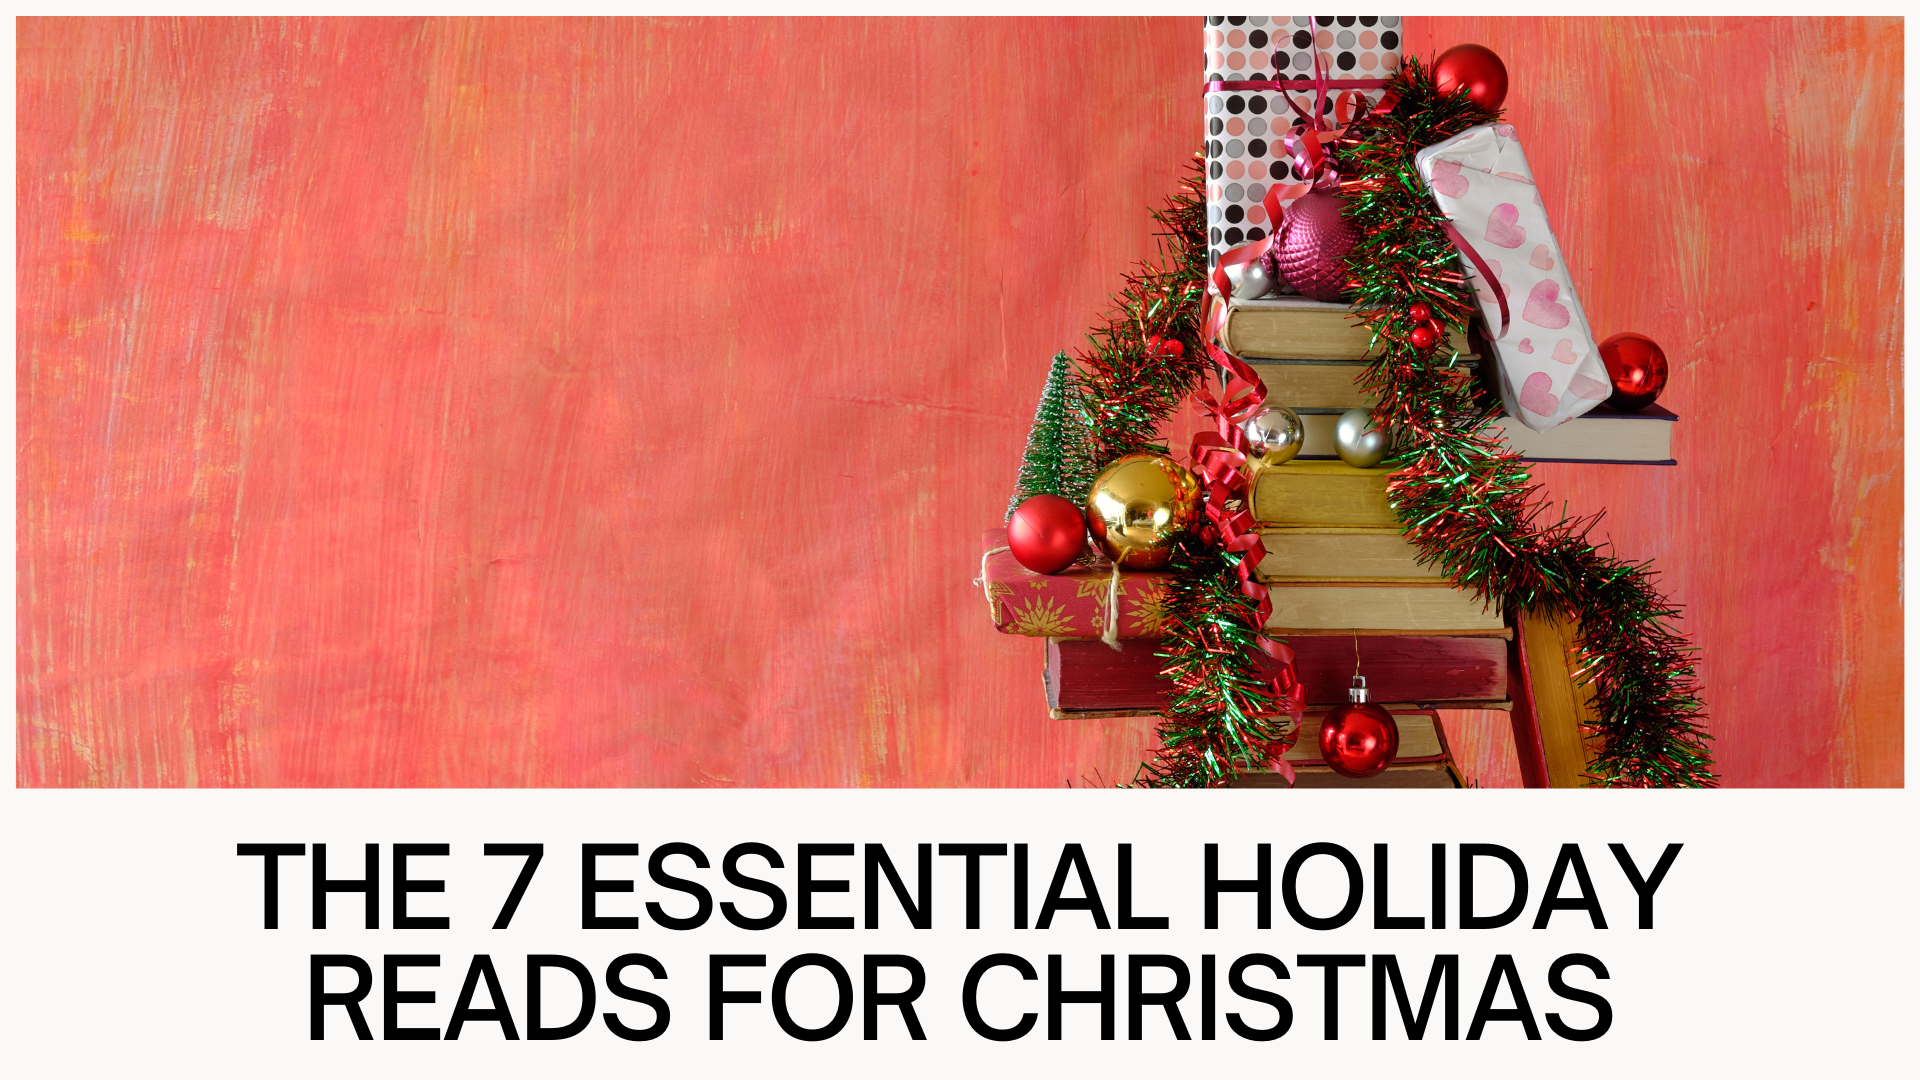 The 7 Essential holiday reads for christmas